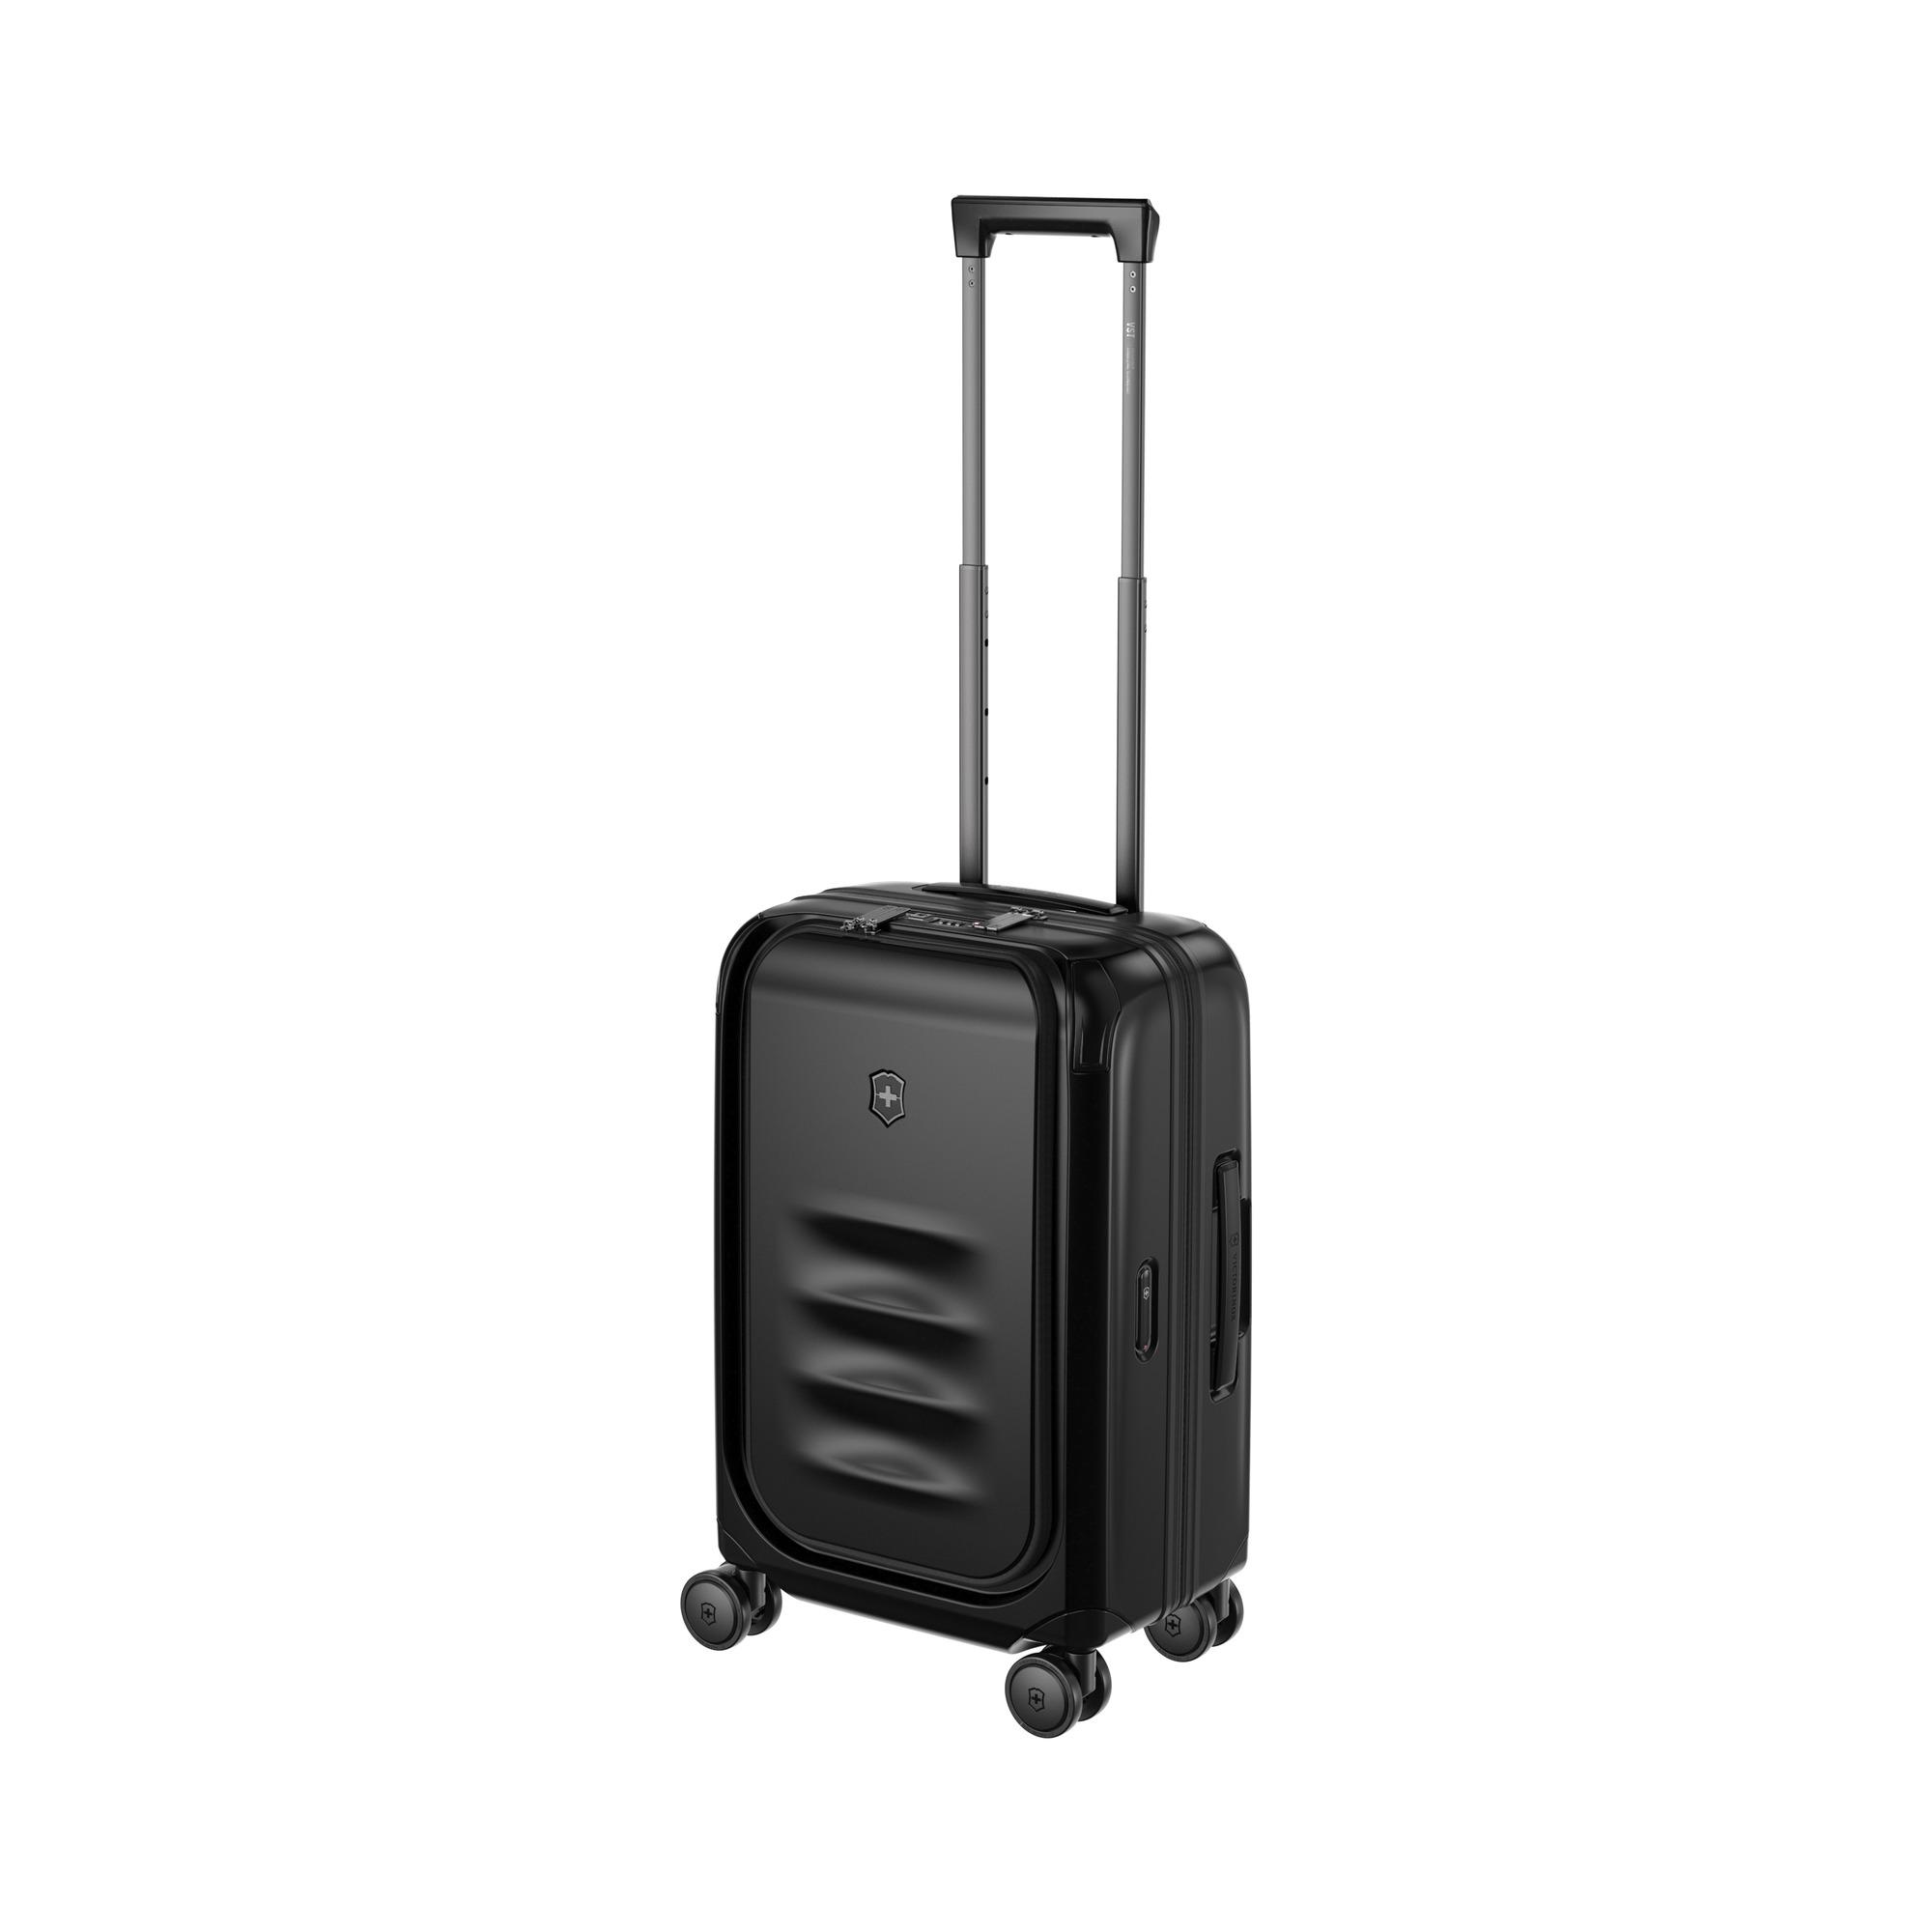 Spectra 3.0, Exp. Frequent Flyer Carry-On, Black - Brandloom